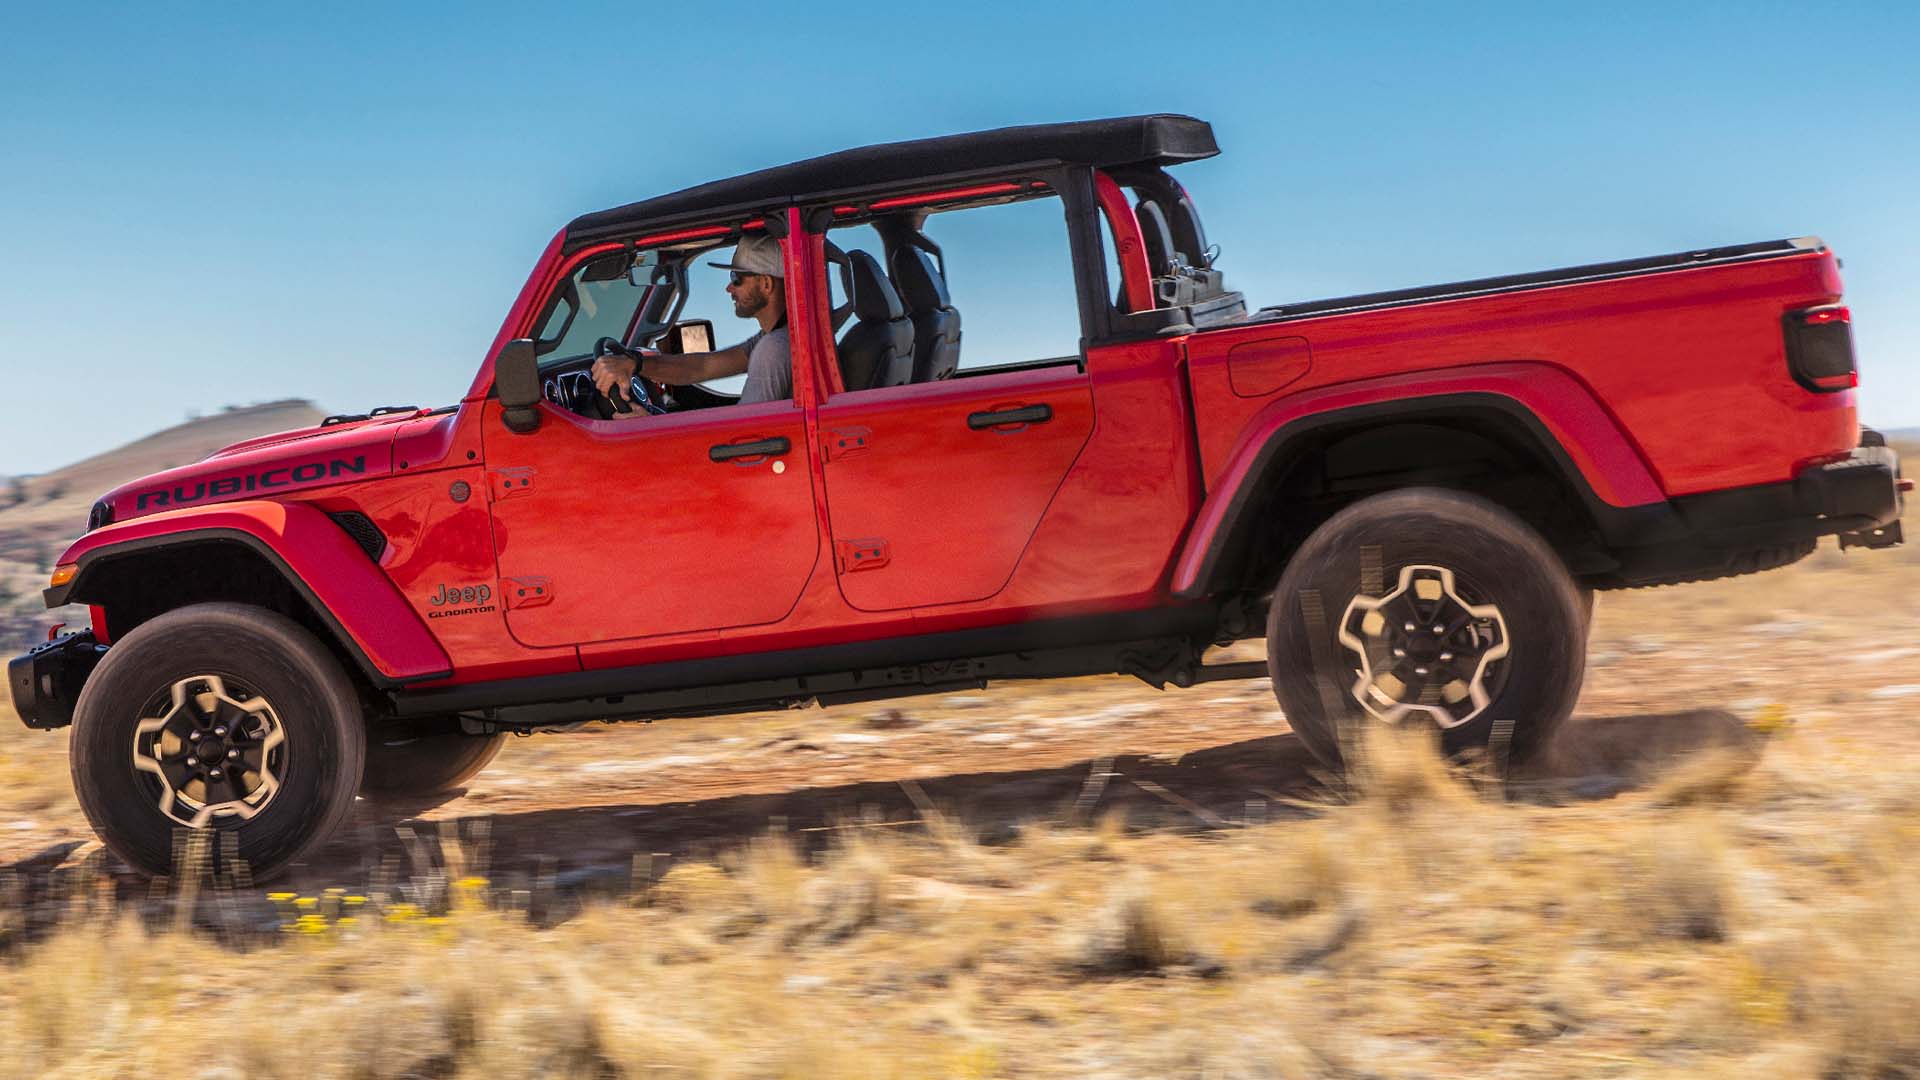 Now the Jeep Gladiator Has Half Doors Just Like the Wrangler